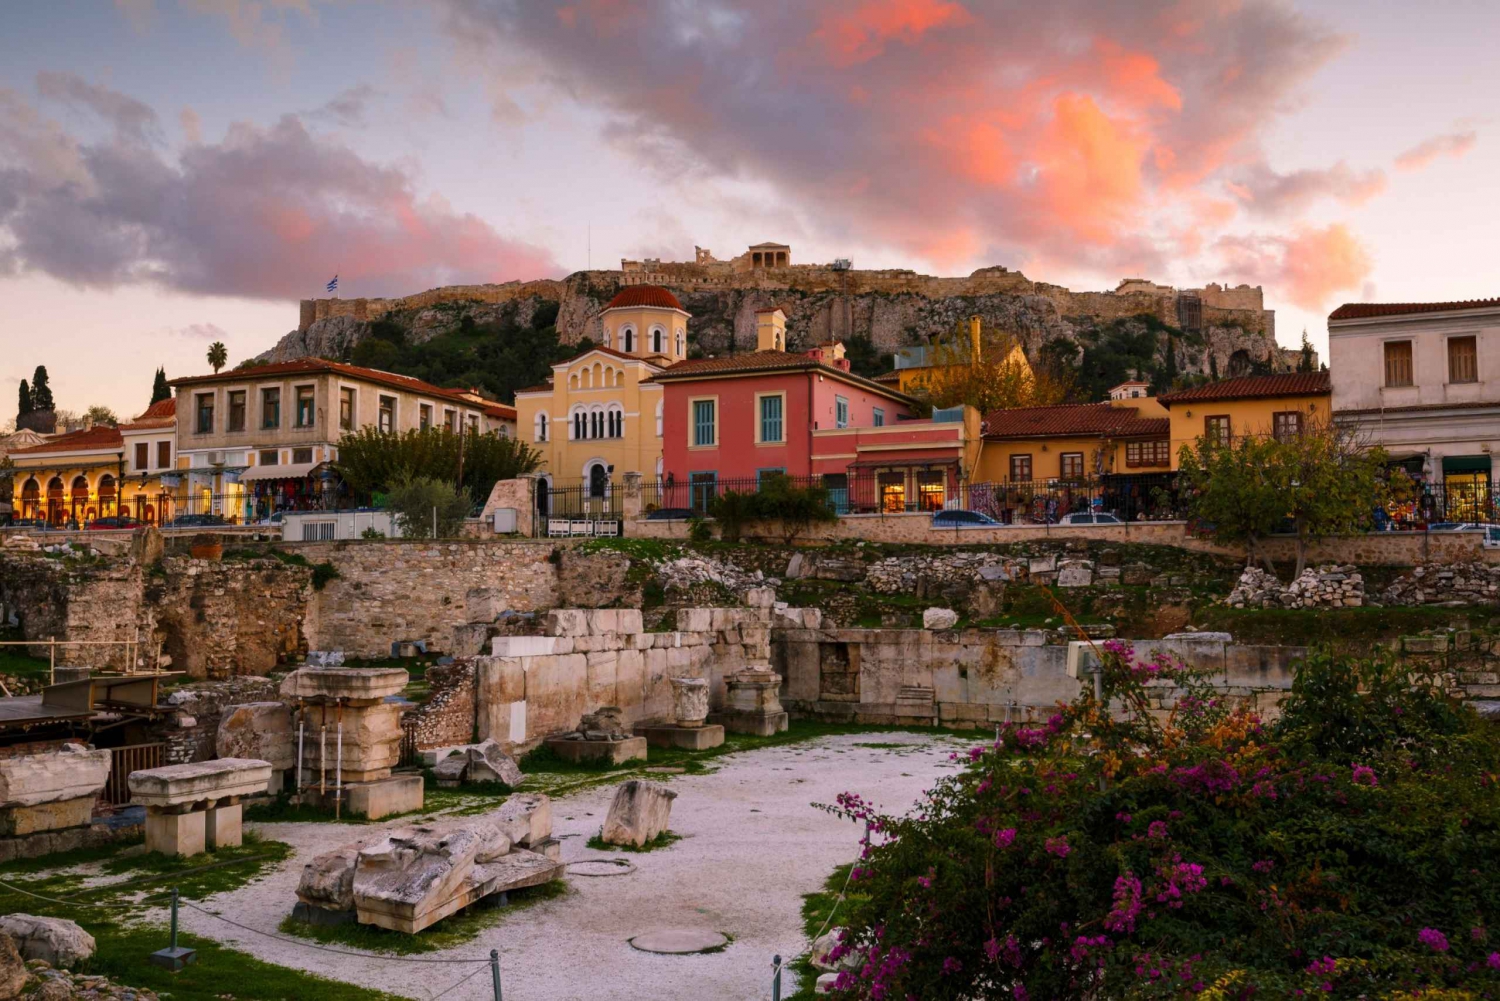 Athens: Ancient Highlights Self-Guided Scavenger Hunt & Tour